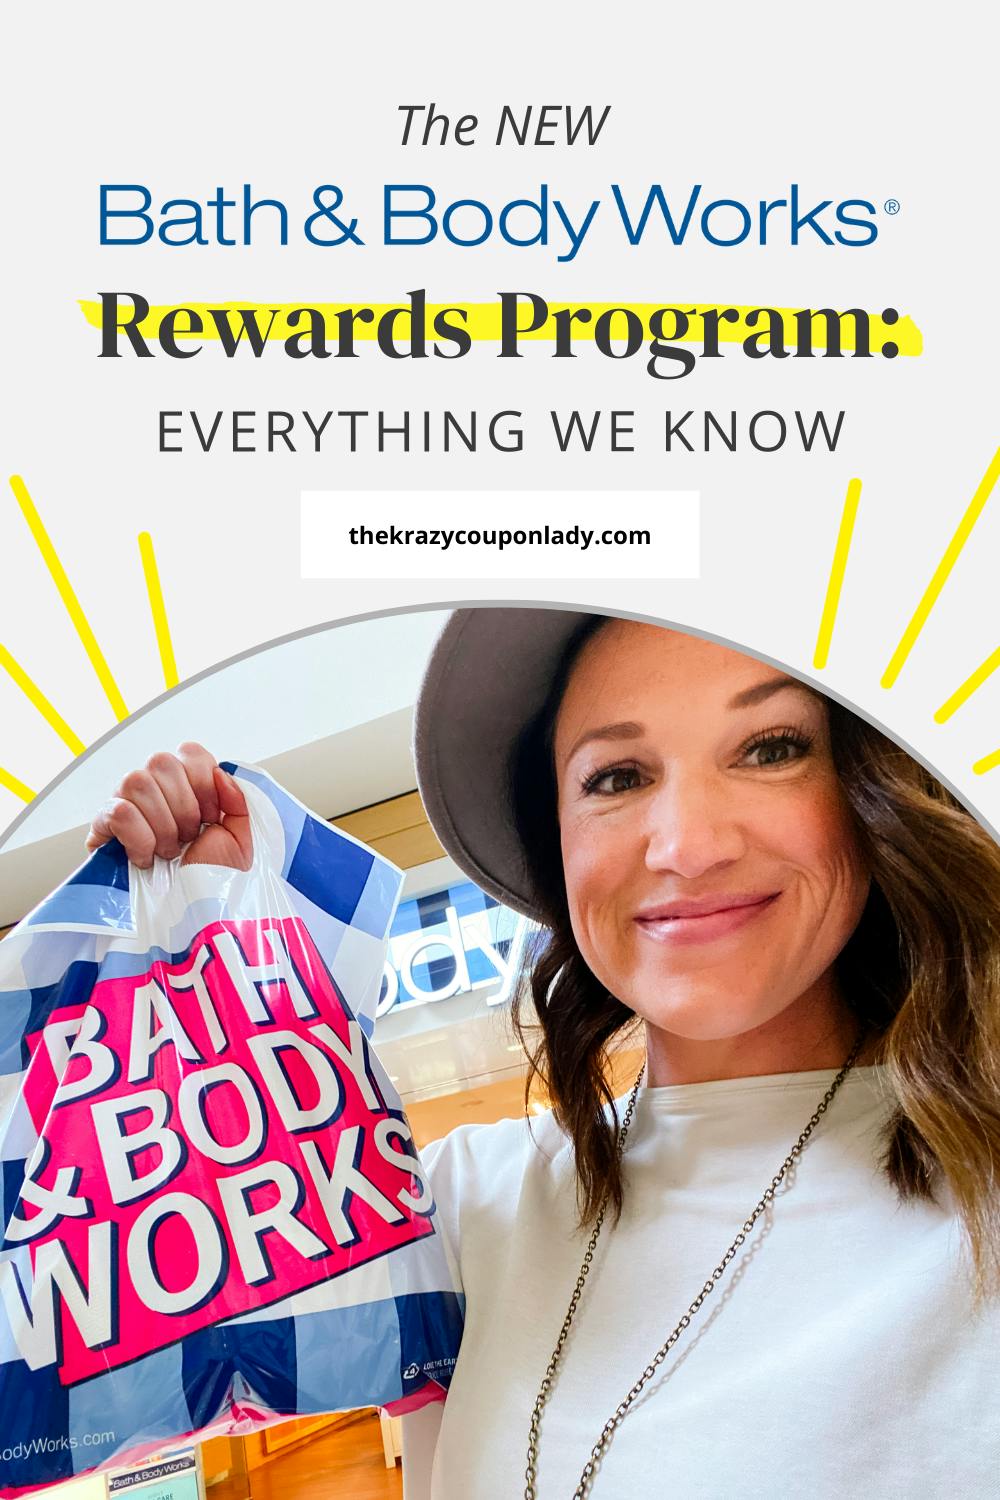 Bath & Body Works Rewards Program — Here Are the Freebies, Coupons & Perks You Get